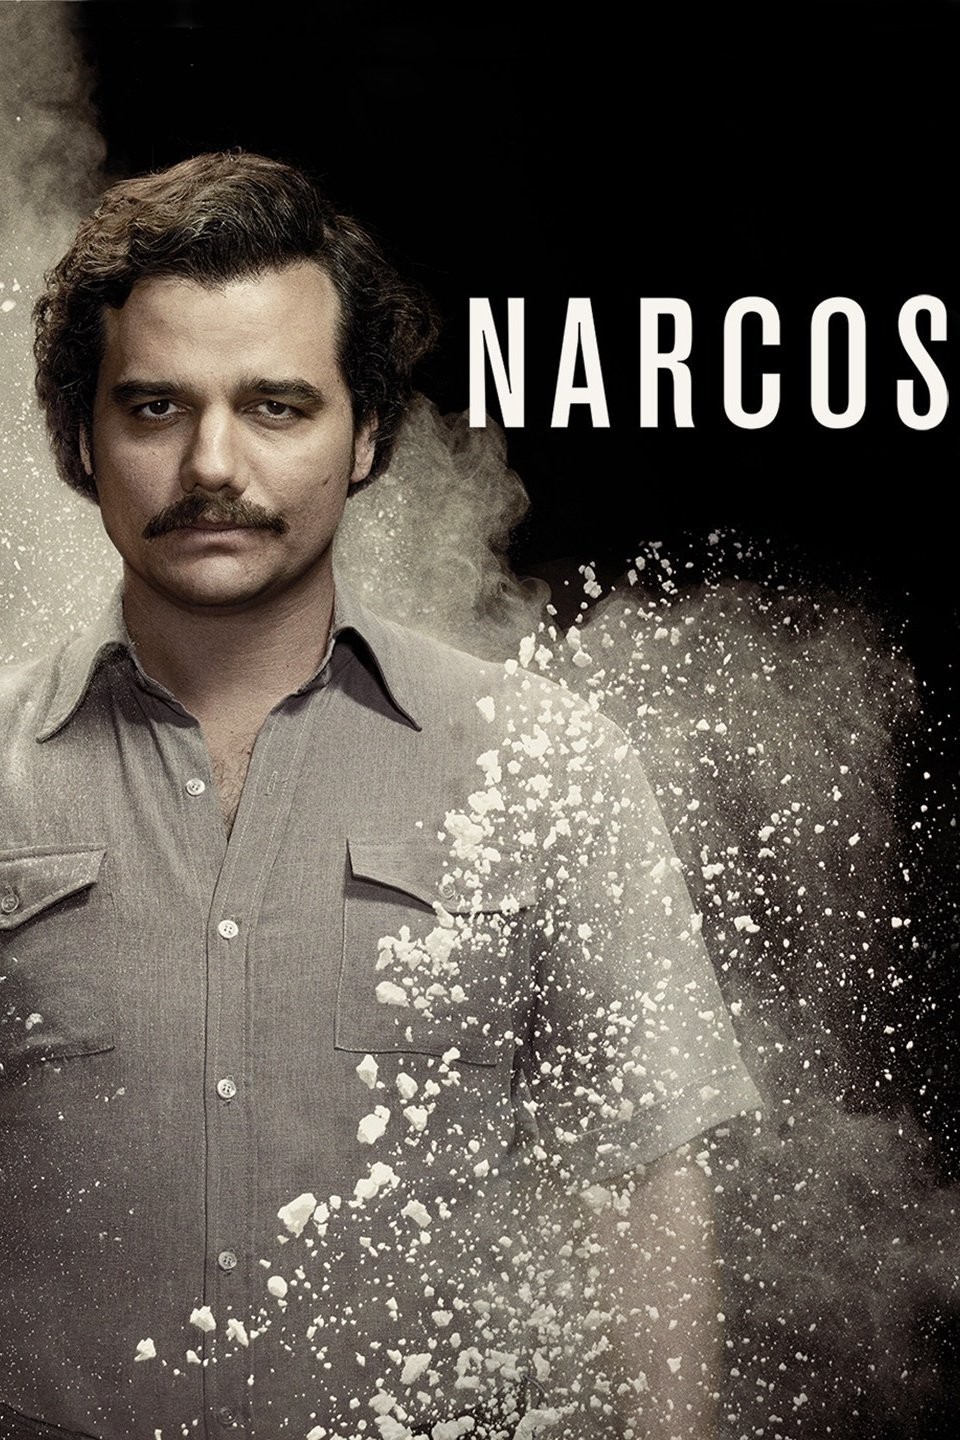 Wagner Moura and the Politics of Pablo Escobar - Interview Magazine